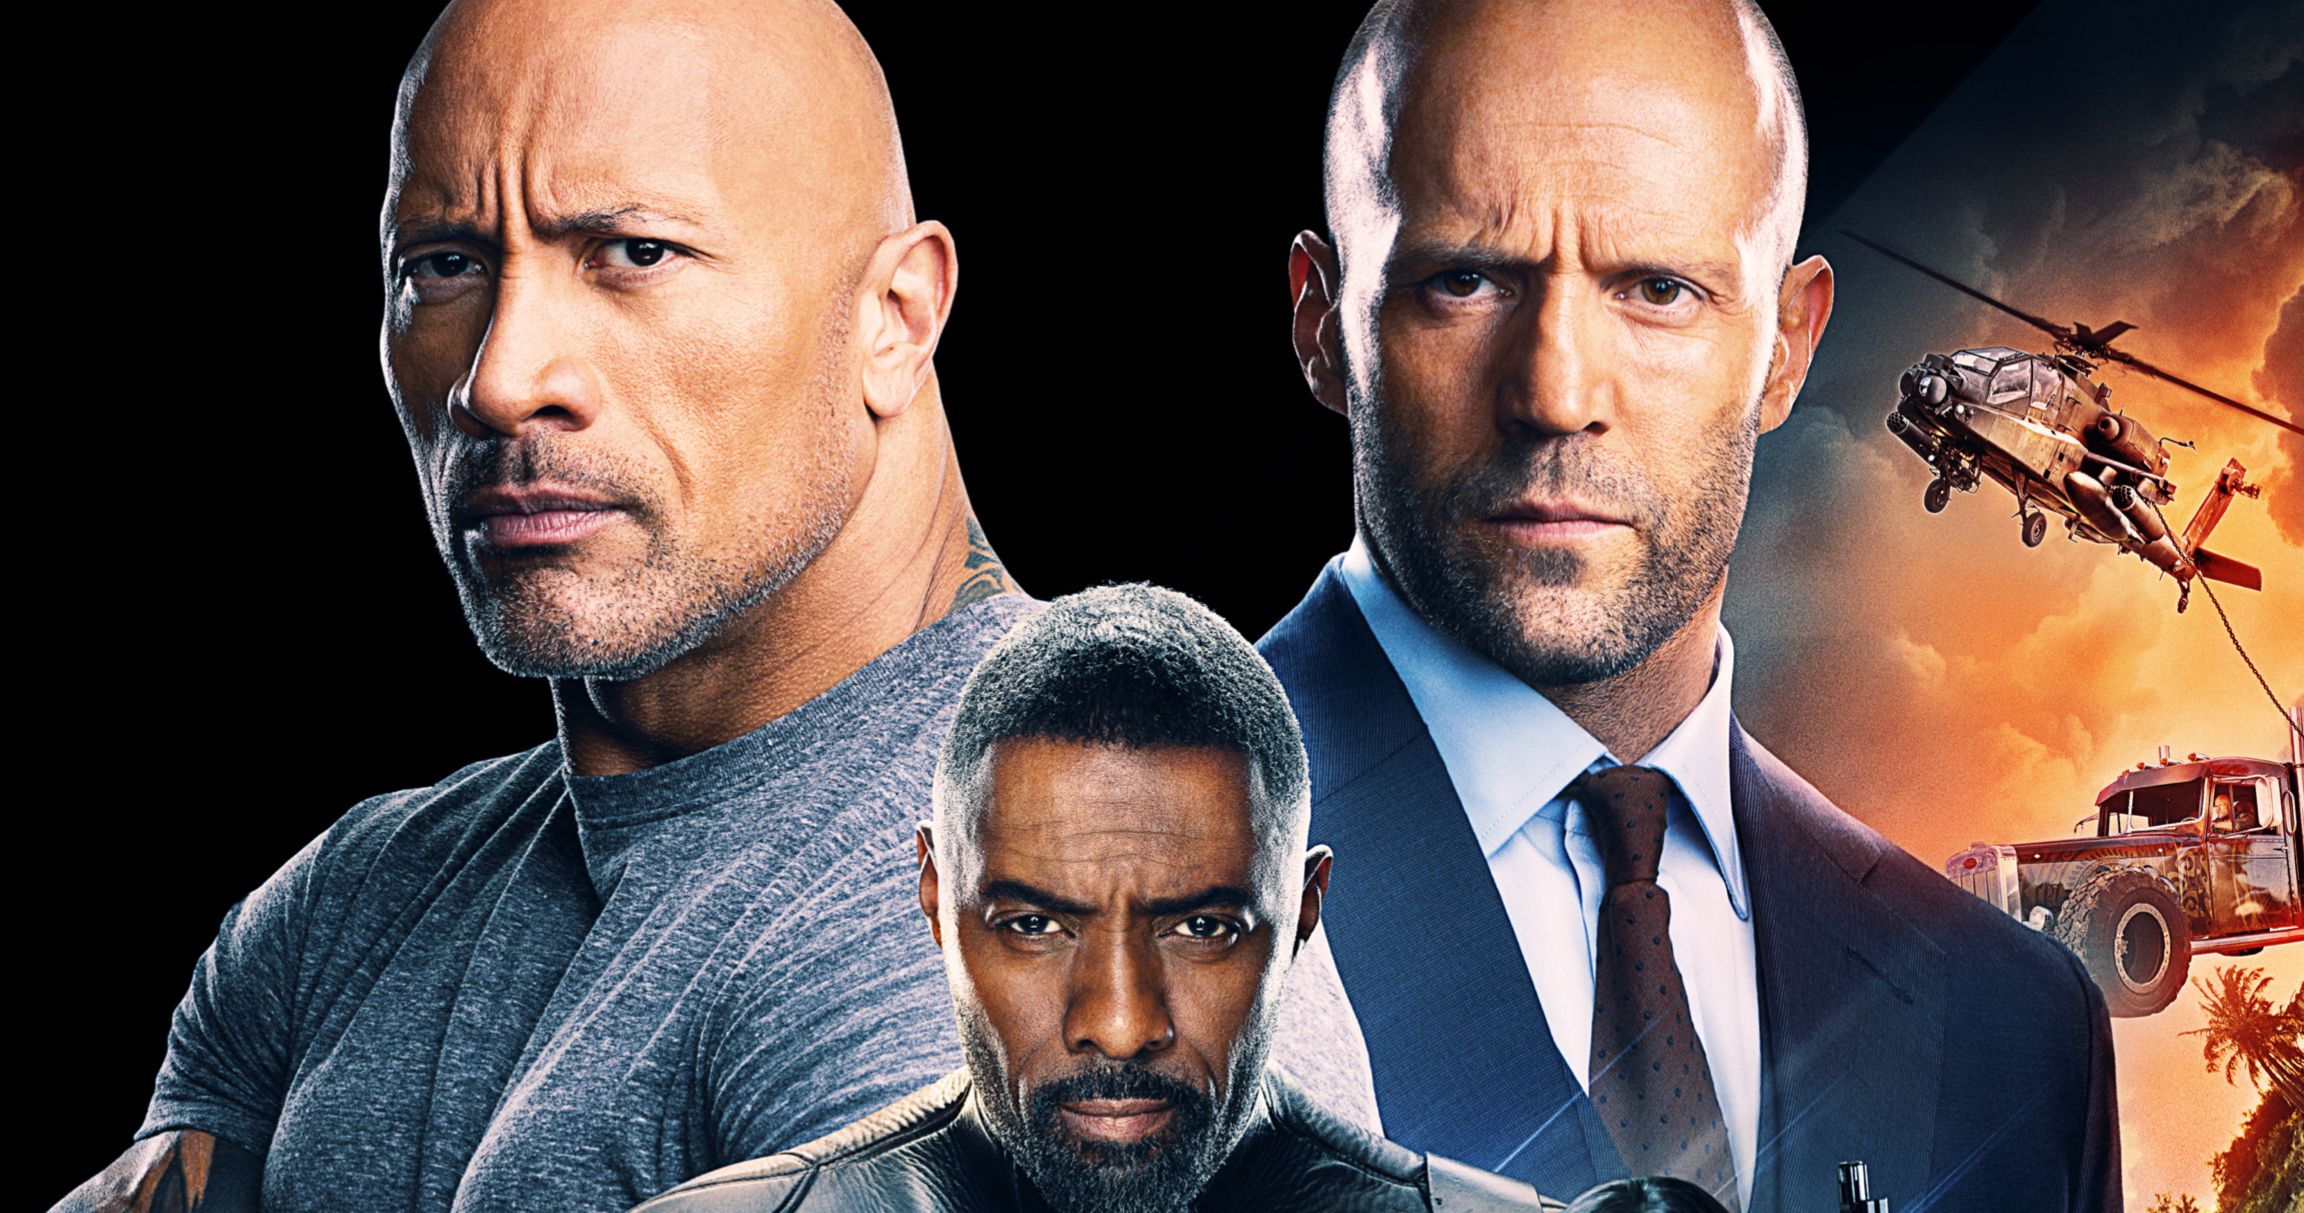 Hobbs &amp; Shaw Final Trailer Races in with Non-Stop Action Madness